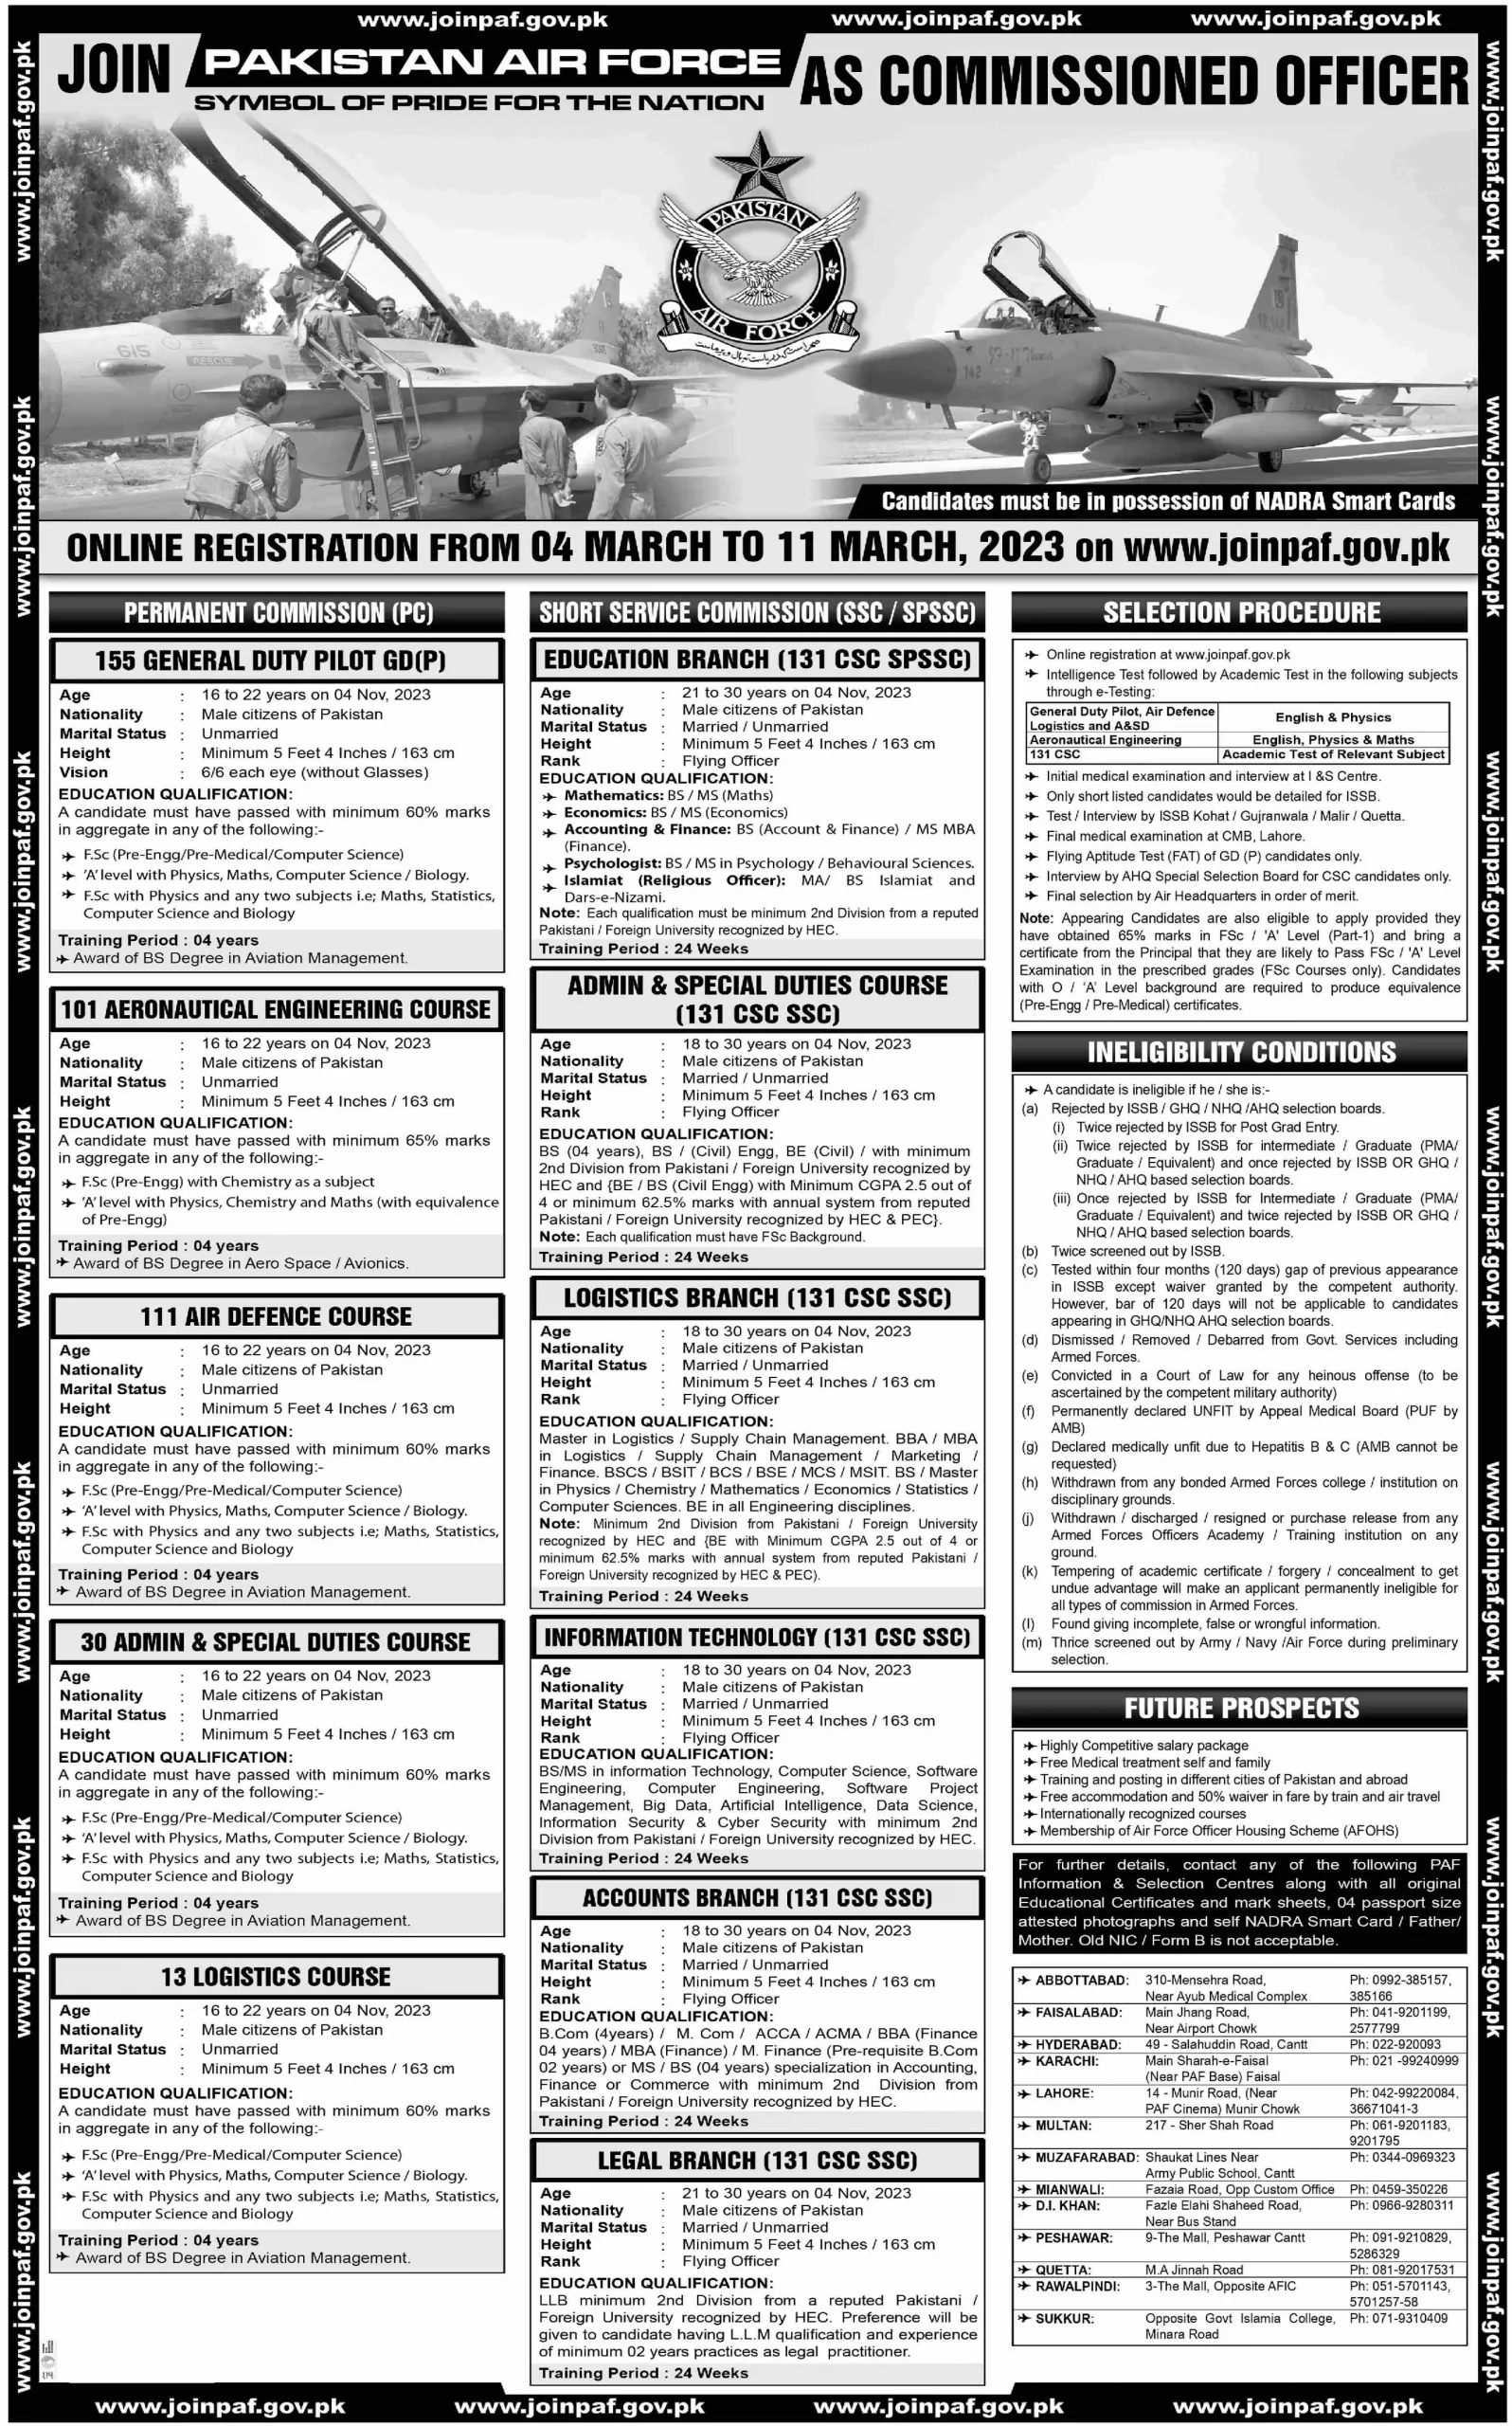 Pakistan Air Force Commissioned Officer Jobs 2023 Advertisement